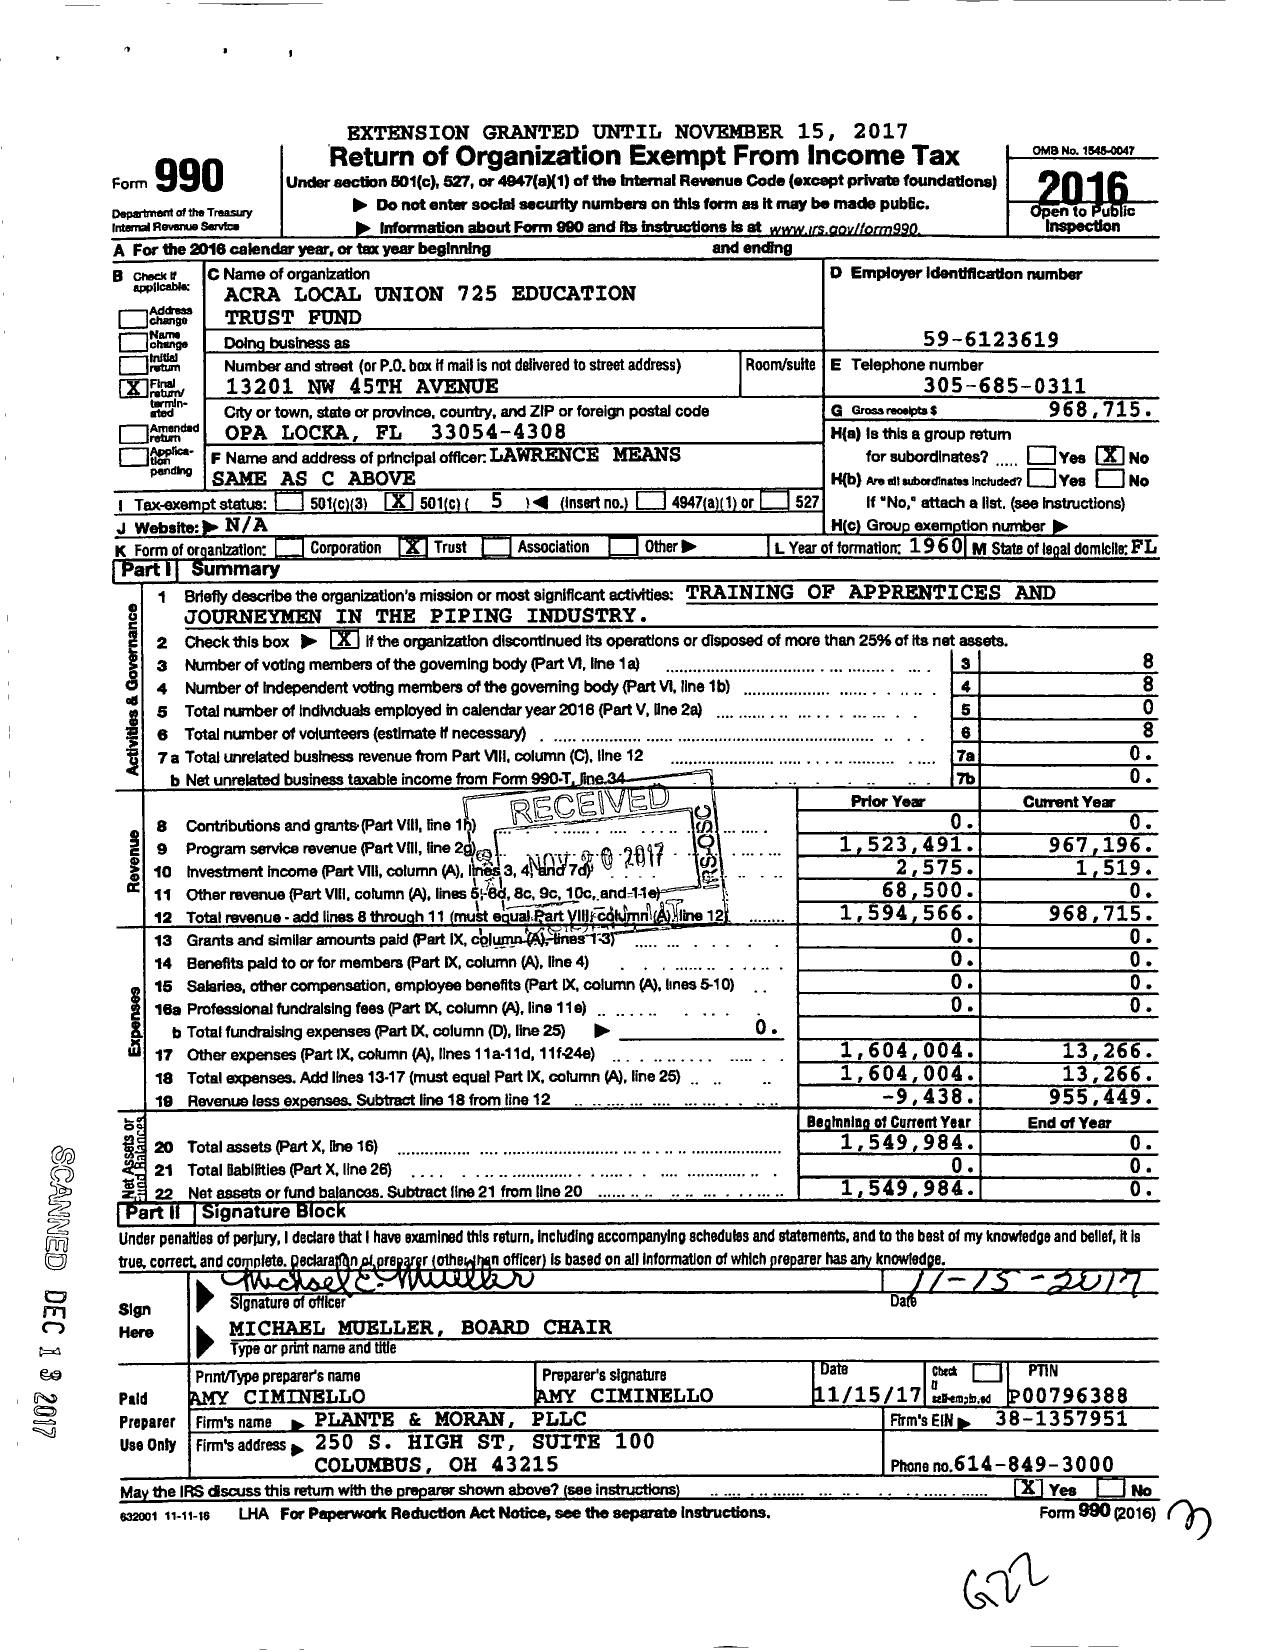 Image of first page of 2016 Form 990O for Acra Local Union 725 Education Trust Fund